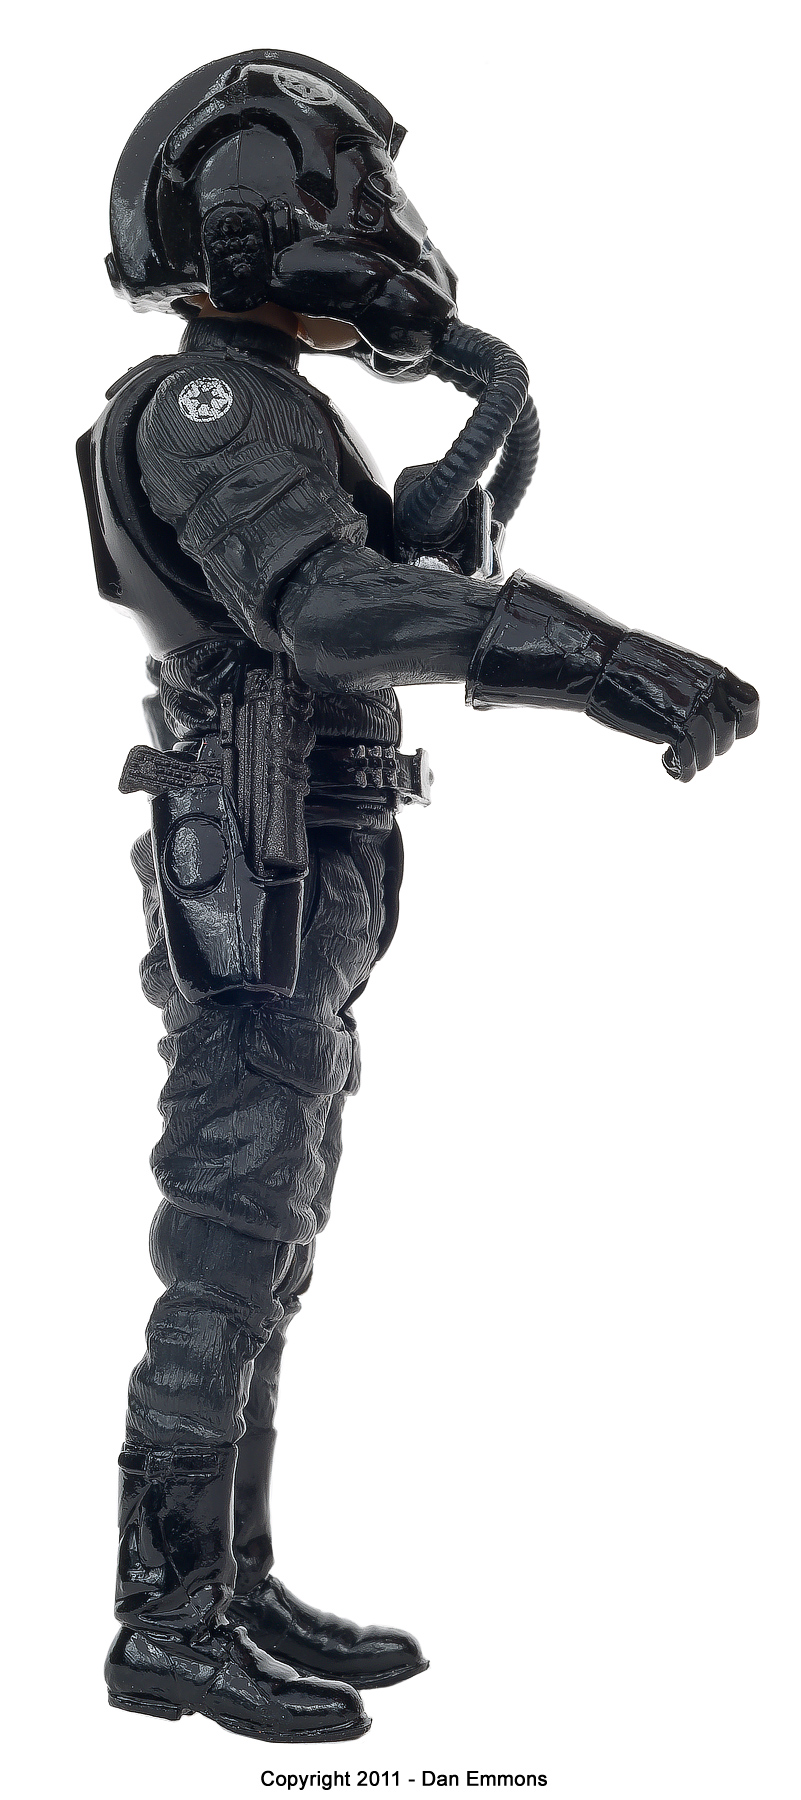 The Vintage Collection - VC65: TIE Fighter Pilot